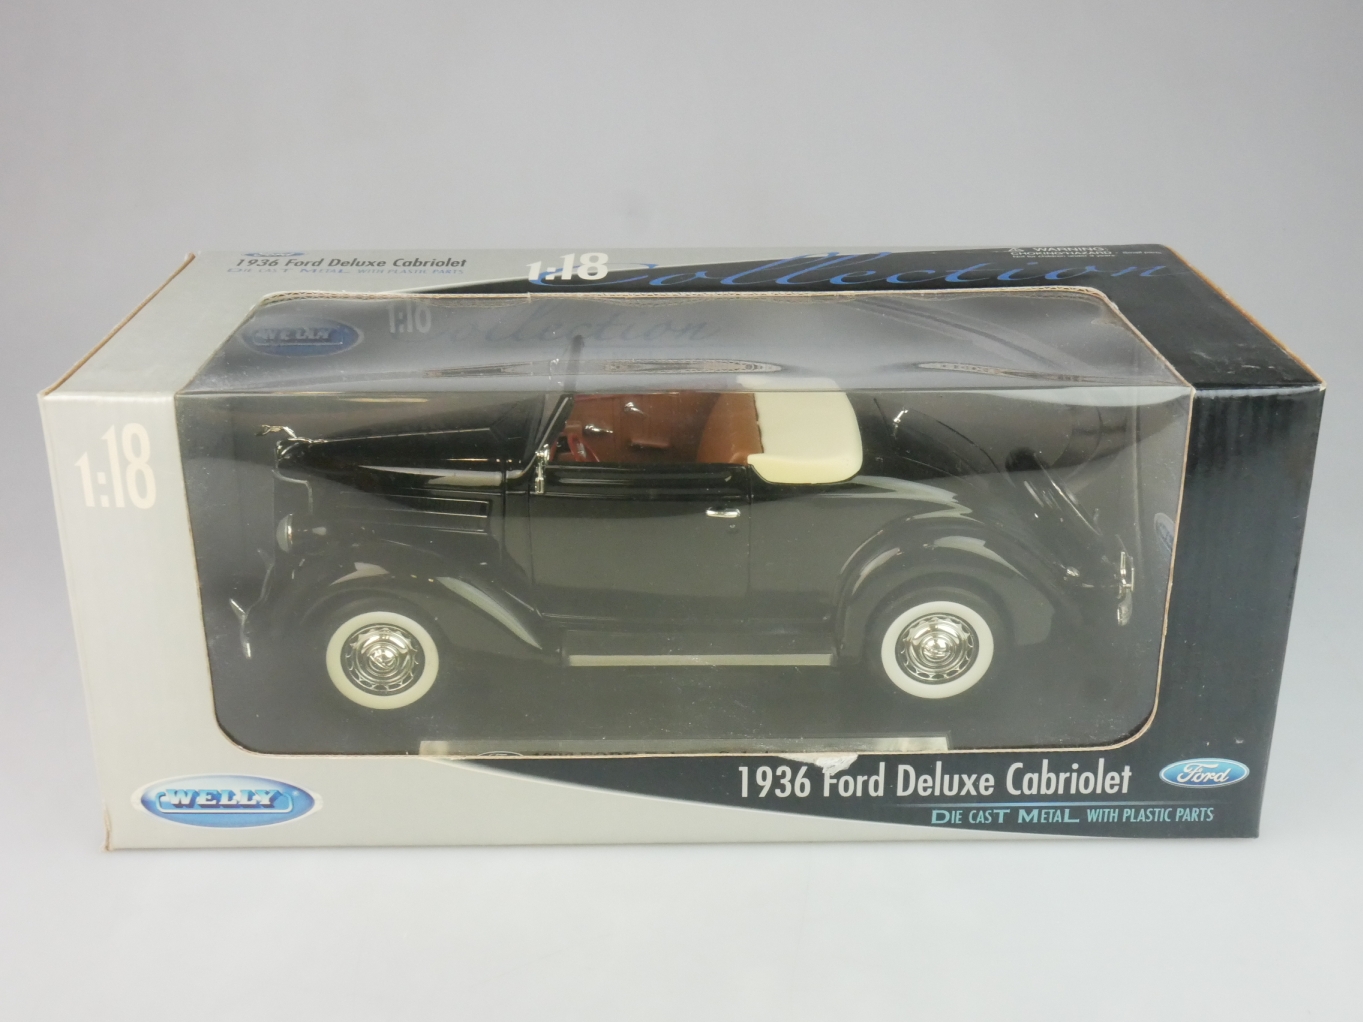 Welly 1/18 1936 Ford Deluxe Cabriolet black 19867W + Box 125971